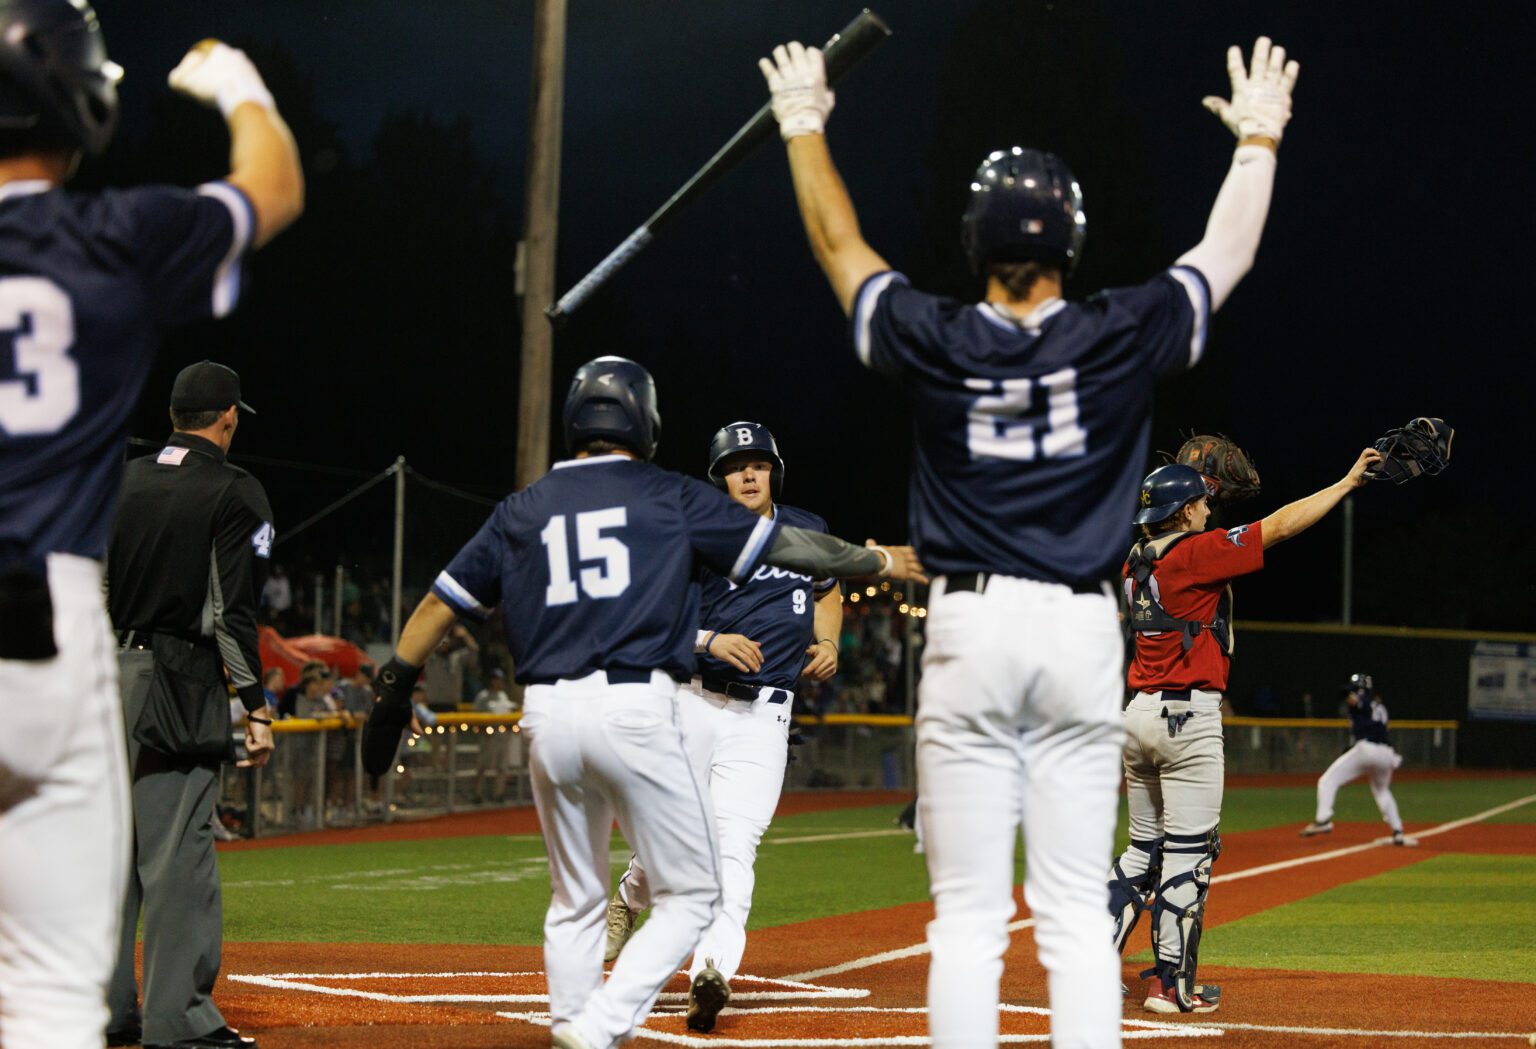 Bellingham Bells players celebrate after Jaidon Matthews (15) and Noah Meffert (9) cross home plate to put the Bells ahead in the eighth inning. The Bells beat the Victoria HarbourCats 4-2 in a West Coast League playoff game at Joe Martin Stadium on Aug. 10.